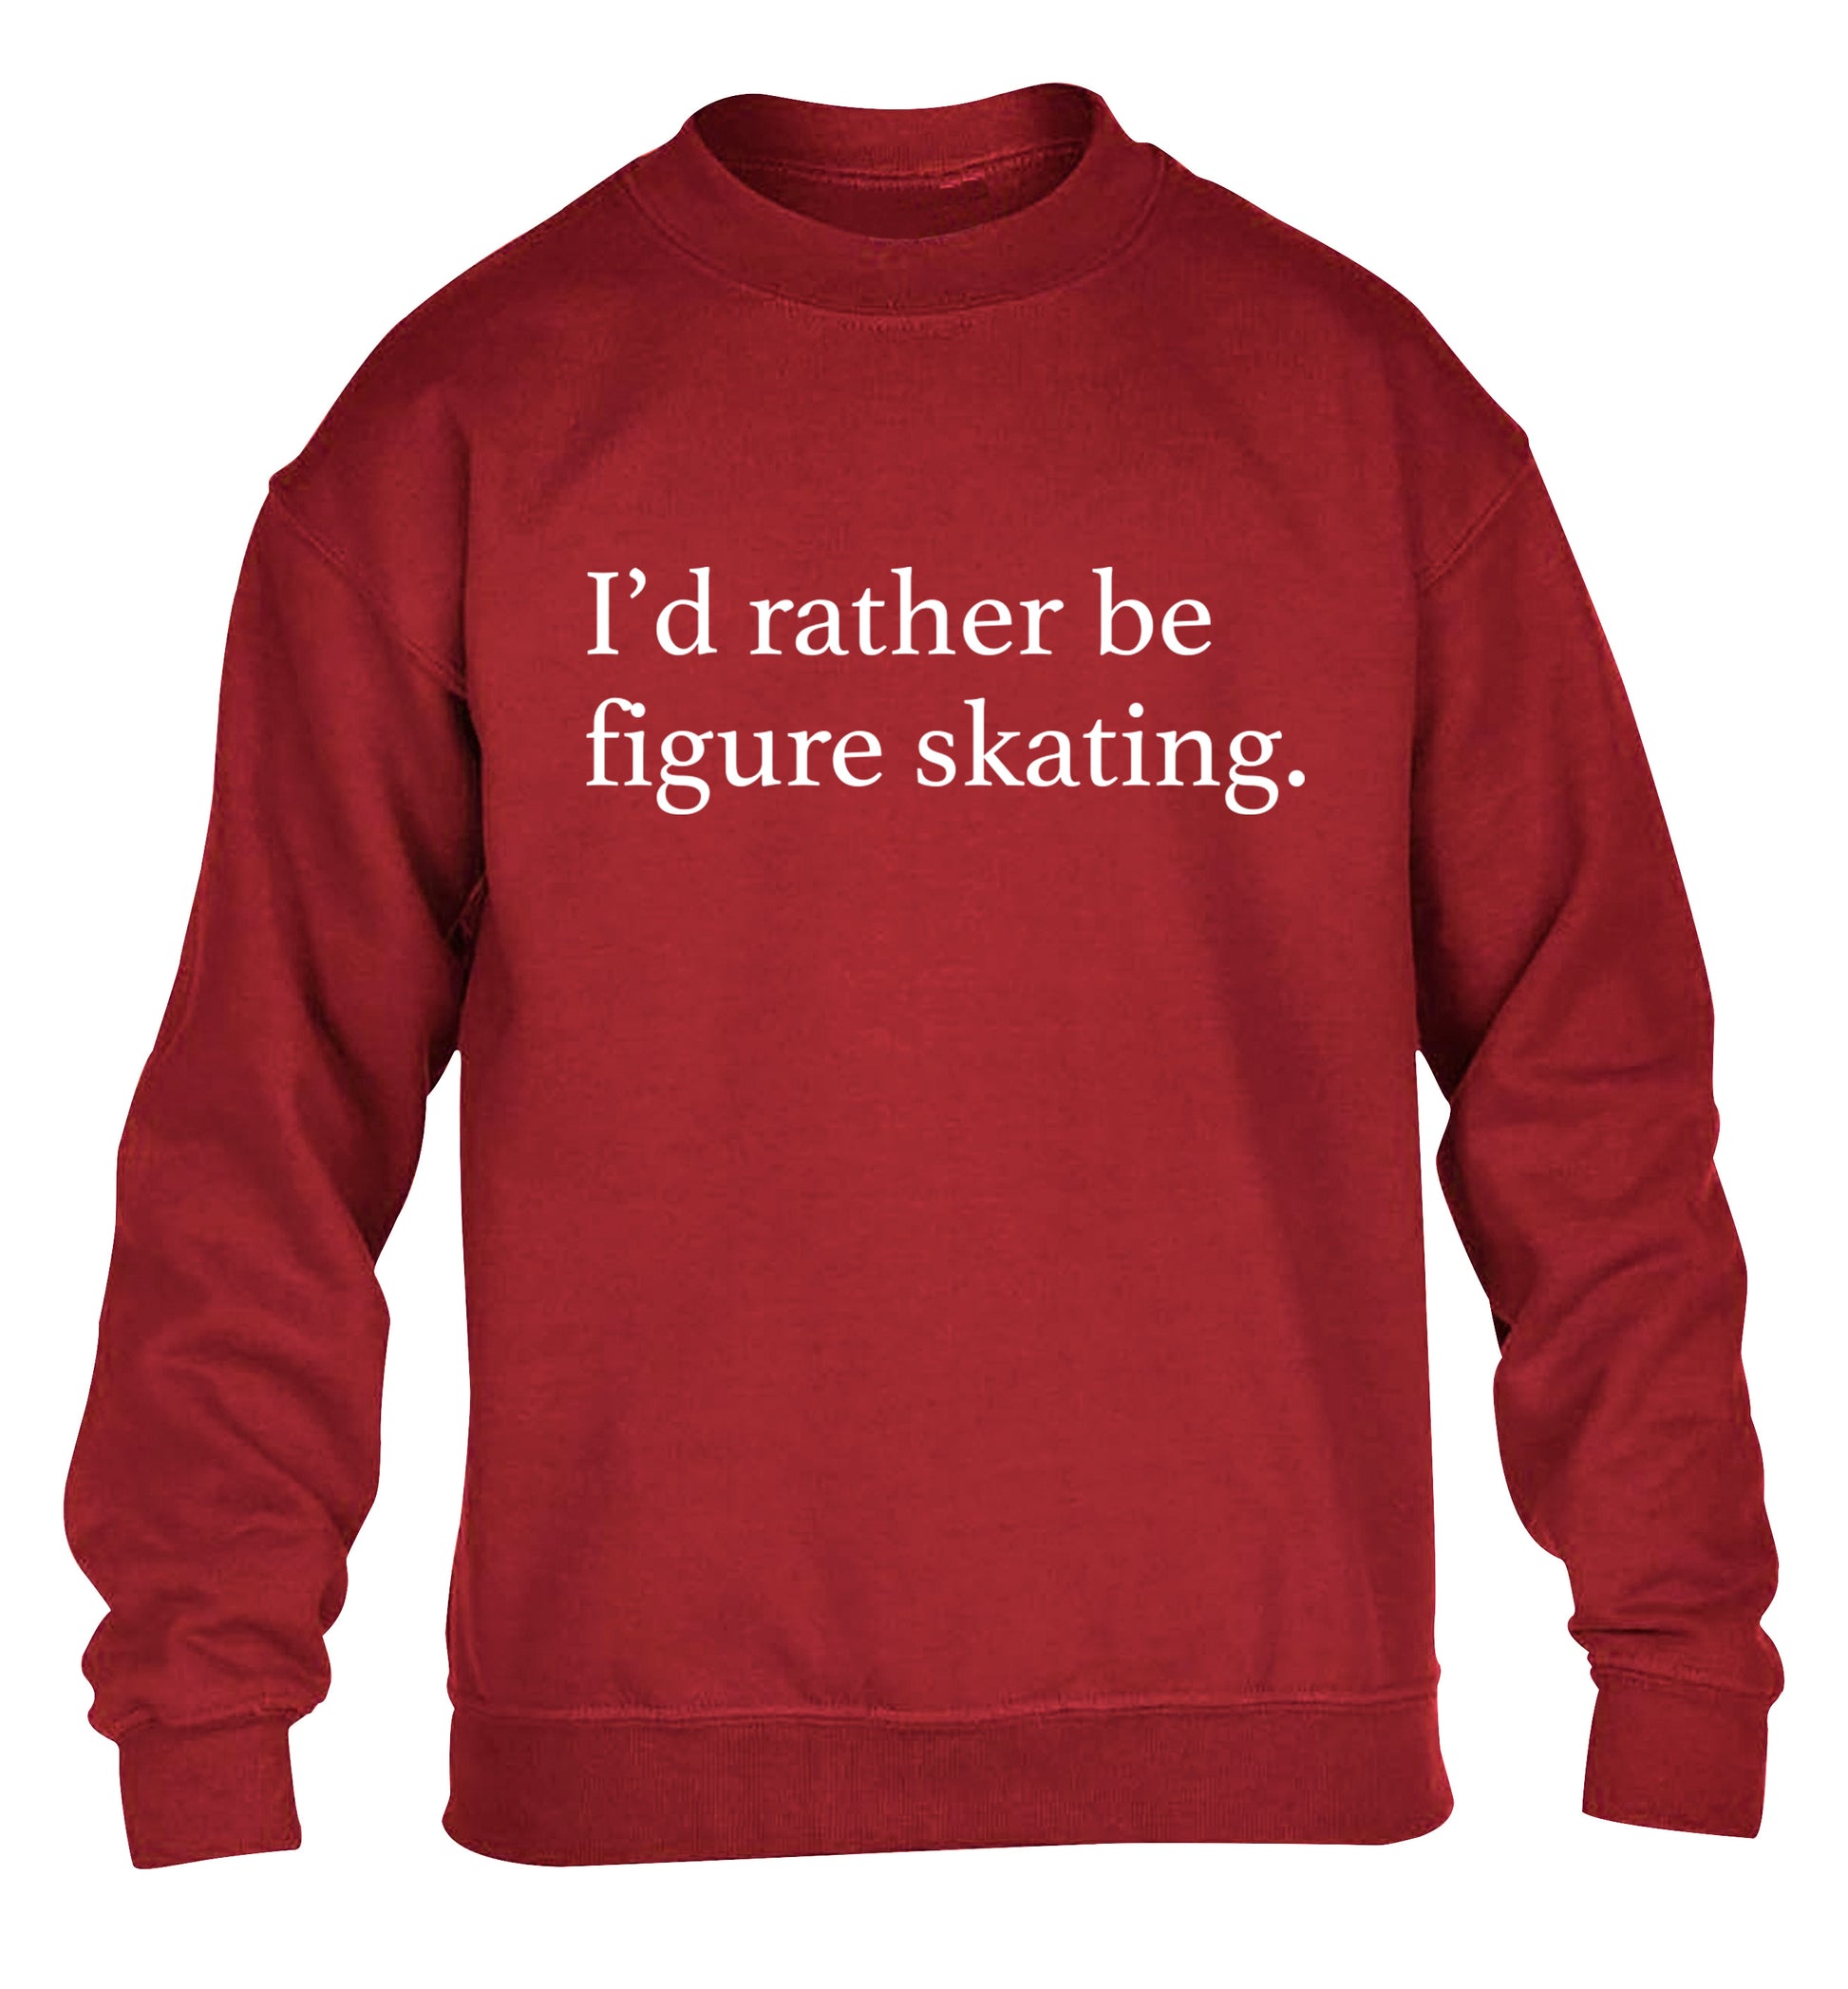 I'd rather be figure skating children's grey sweater 12-14 Years